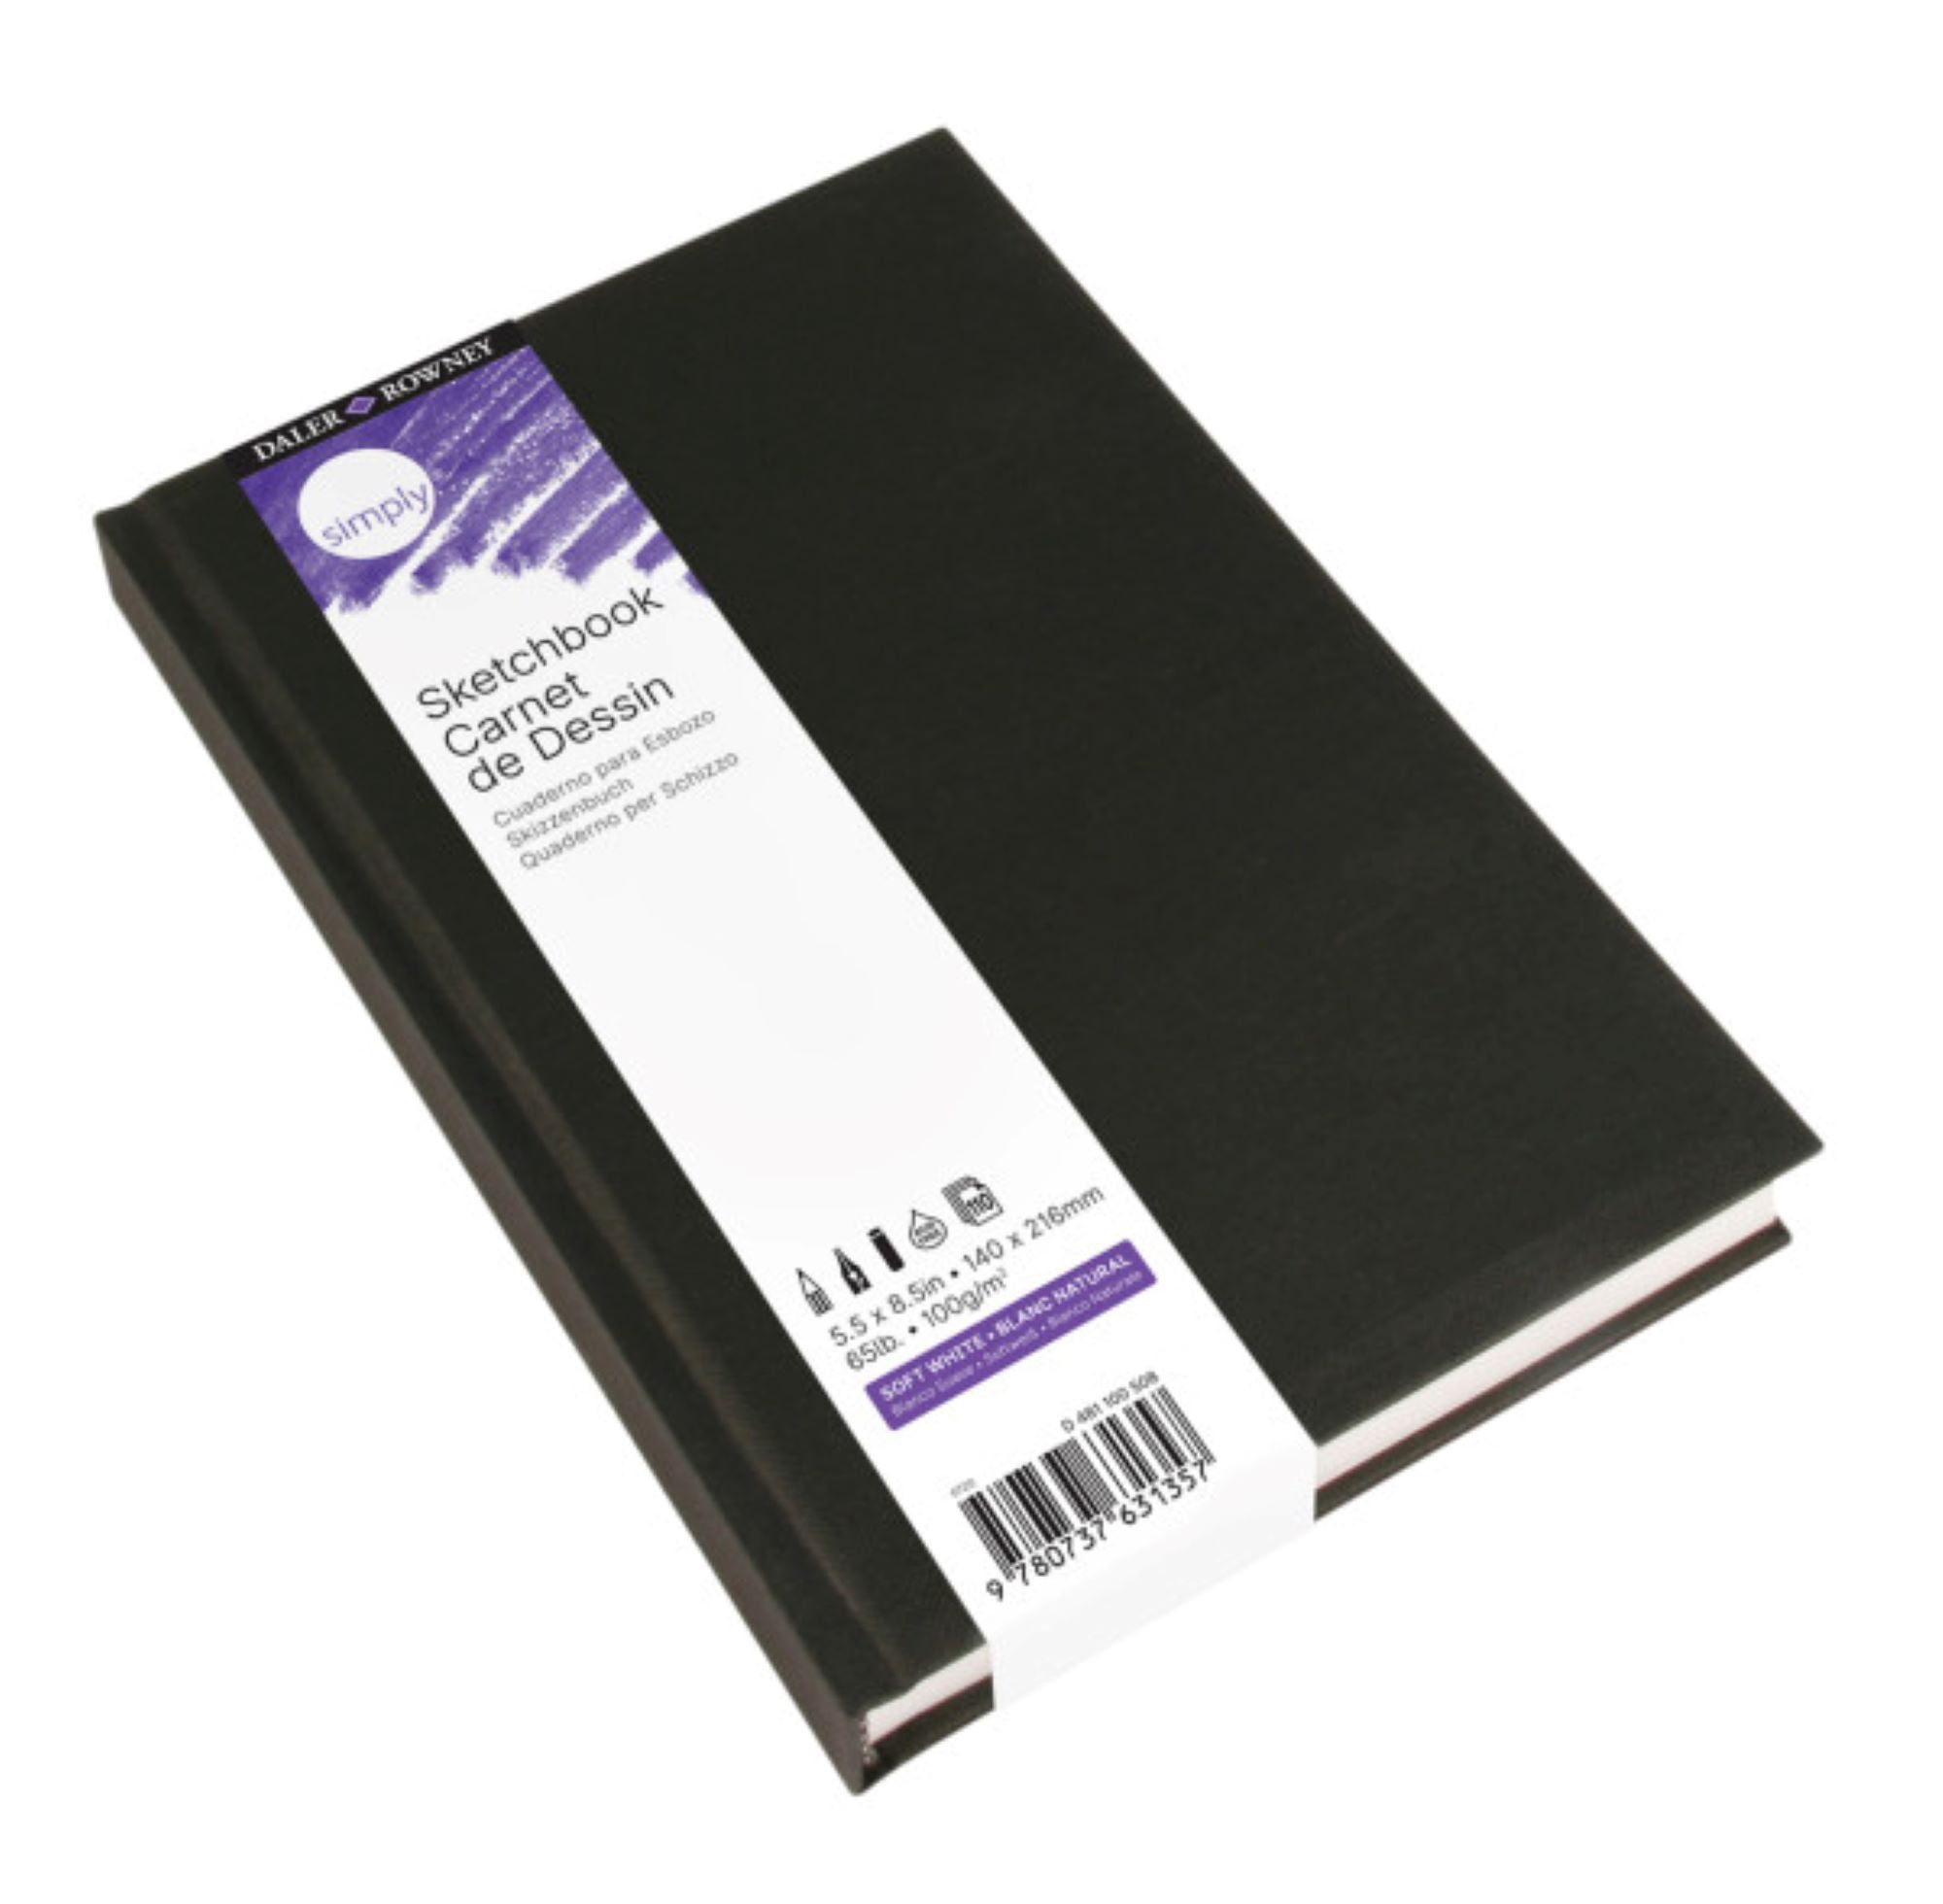 Daler-Rowney Simply Hardbound Sketchbook, 5.5" x 8.5" Soft White Pages, 80 Sheets